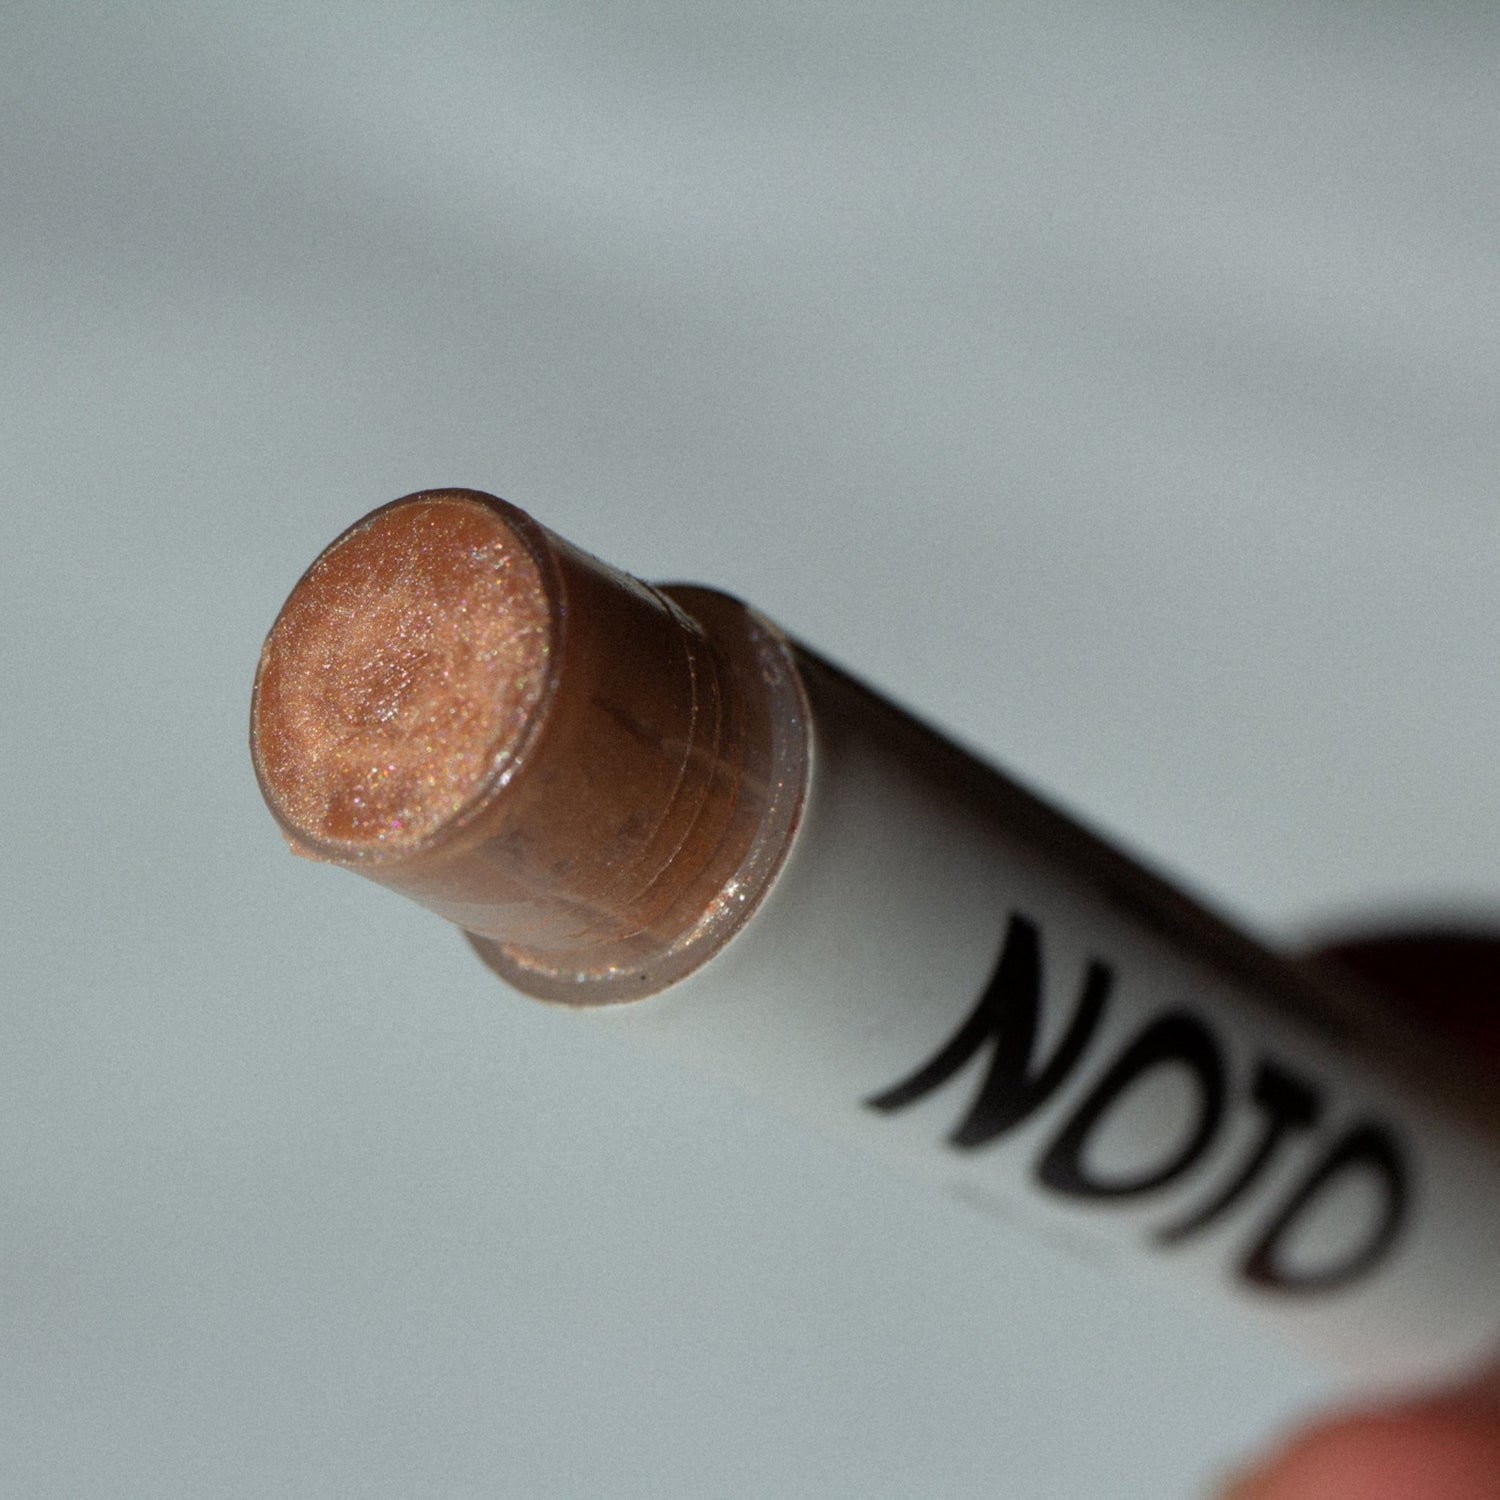 NOTO Hydra Highlighter Stick - The Slow Clinic